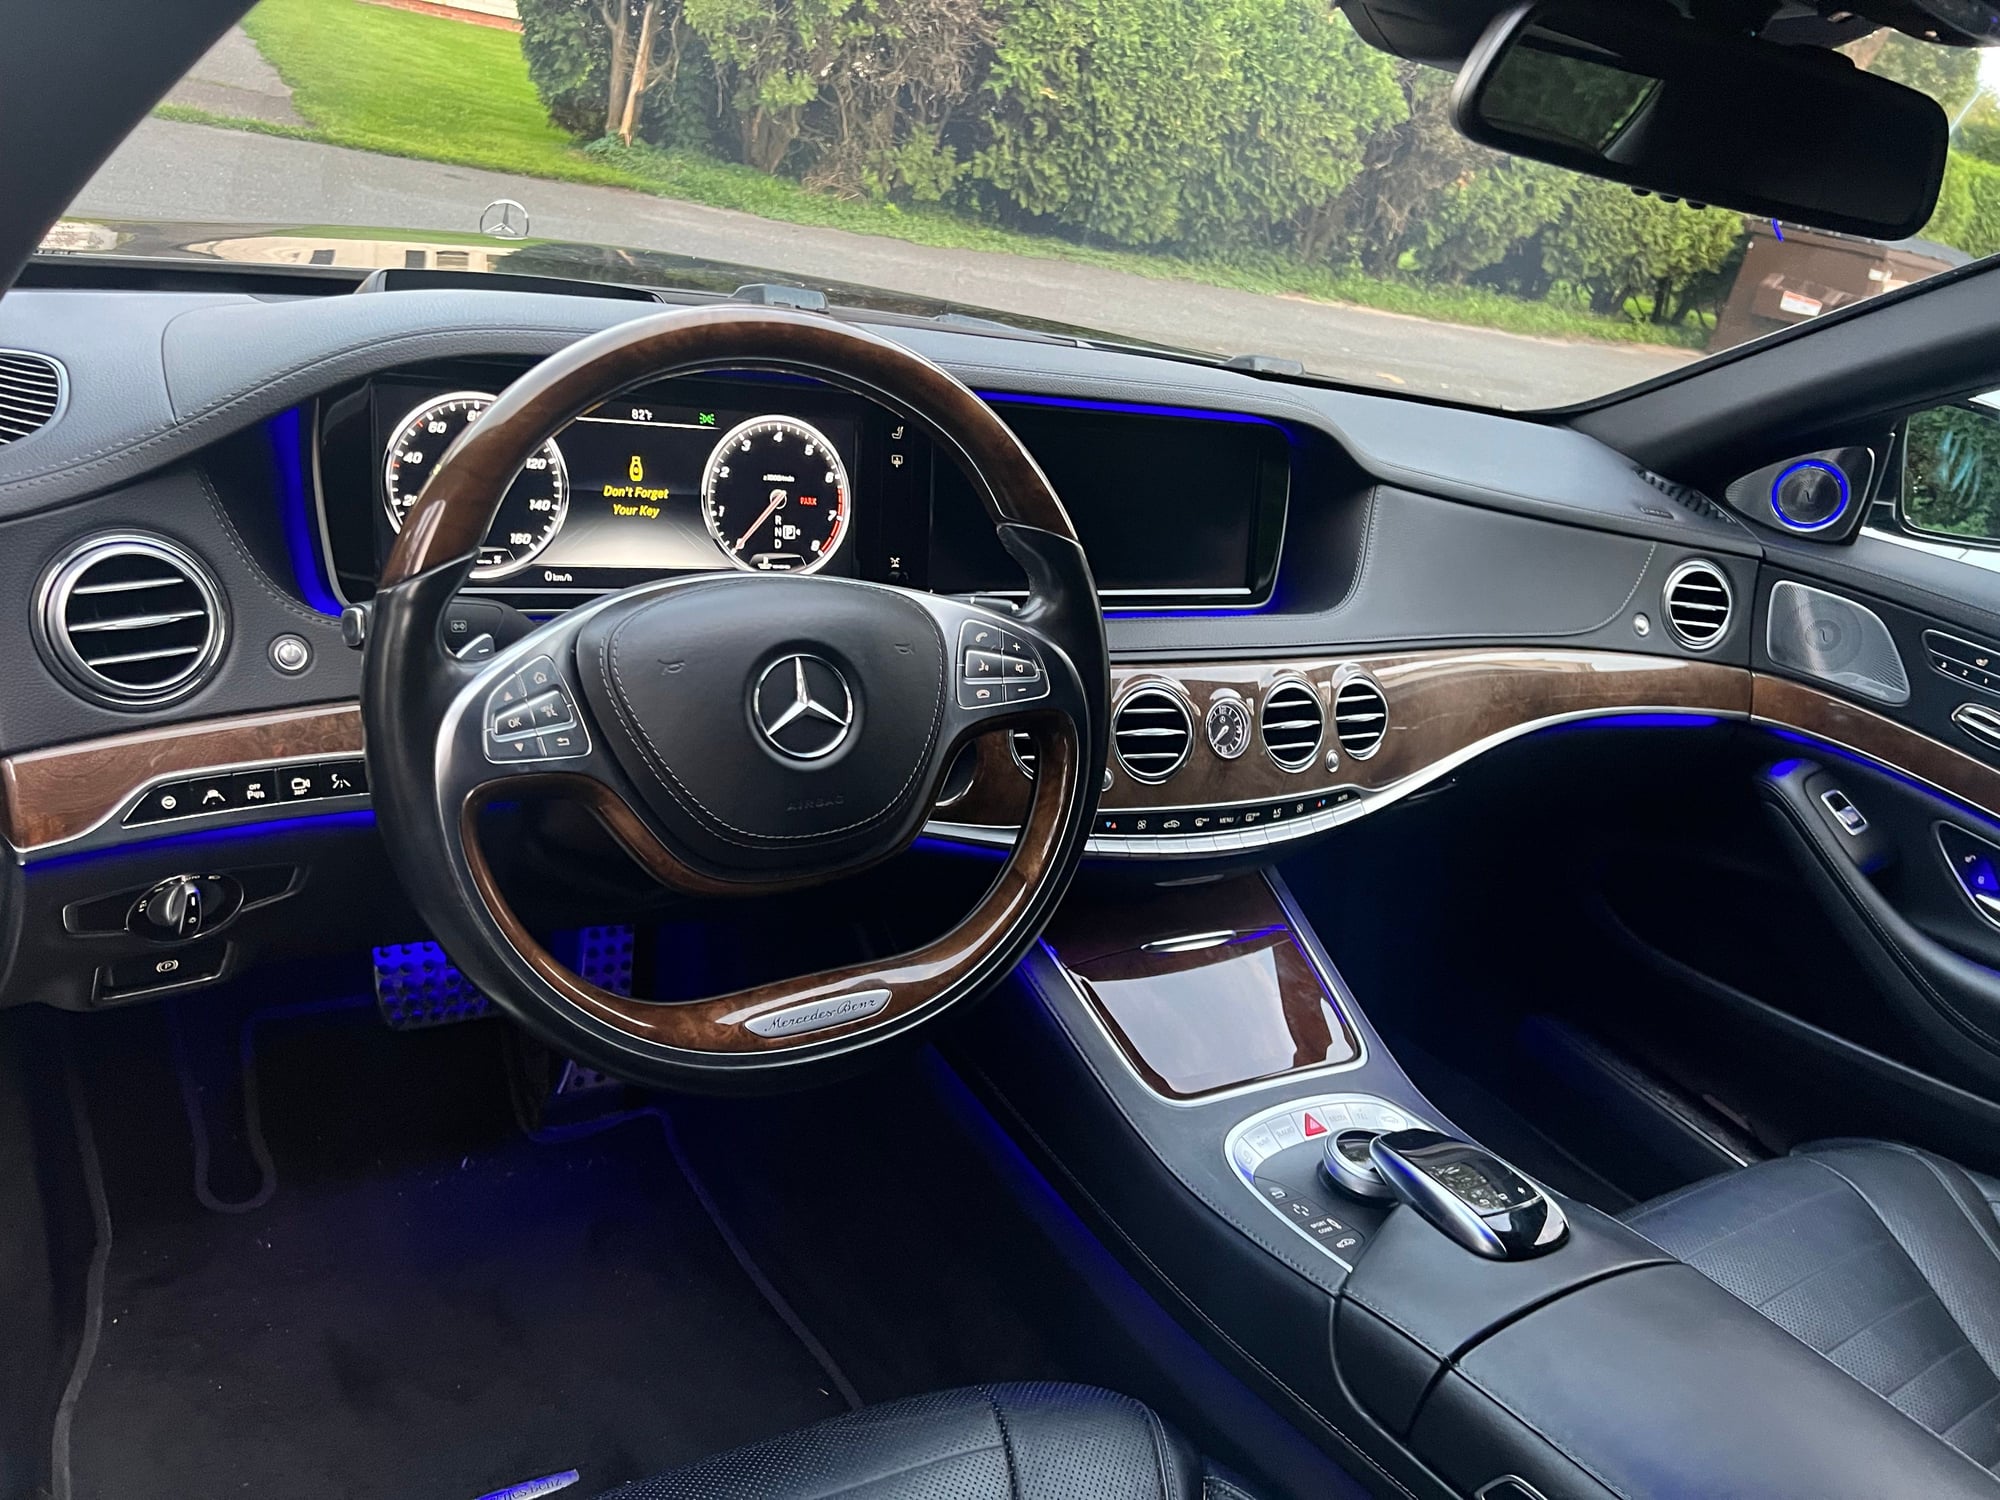 2015 Mercedes-Benz S550 - 2015 s550 renntech for sale - Used - VIN FA150069 - 104,000 Miles - 8 cyl - Automatic - Sedan - Black - Vernon, CT 06066, United States